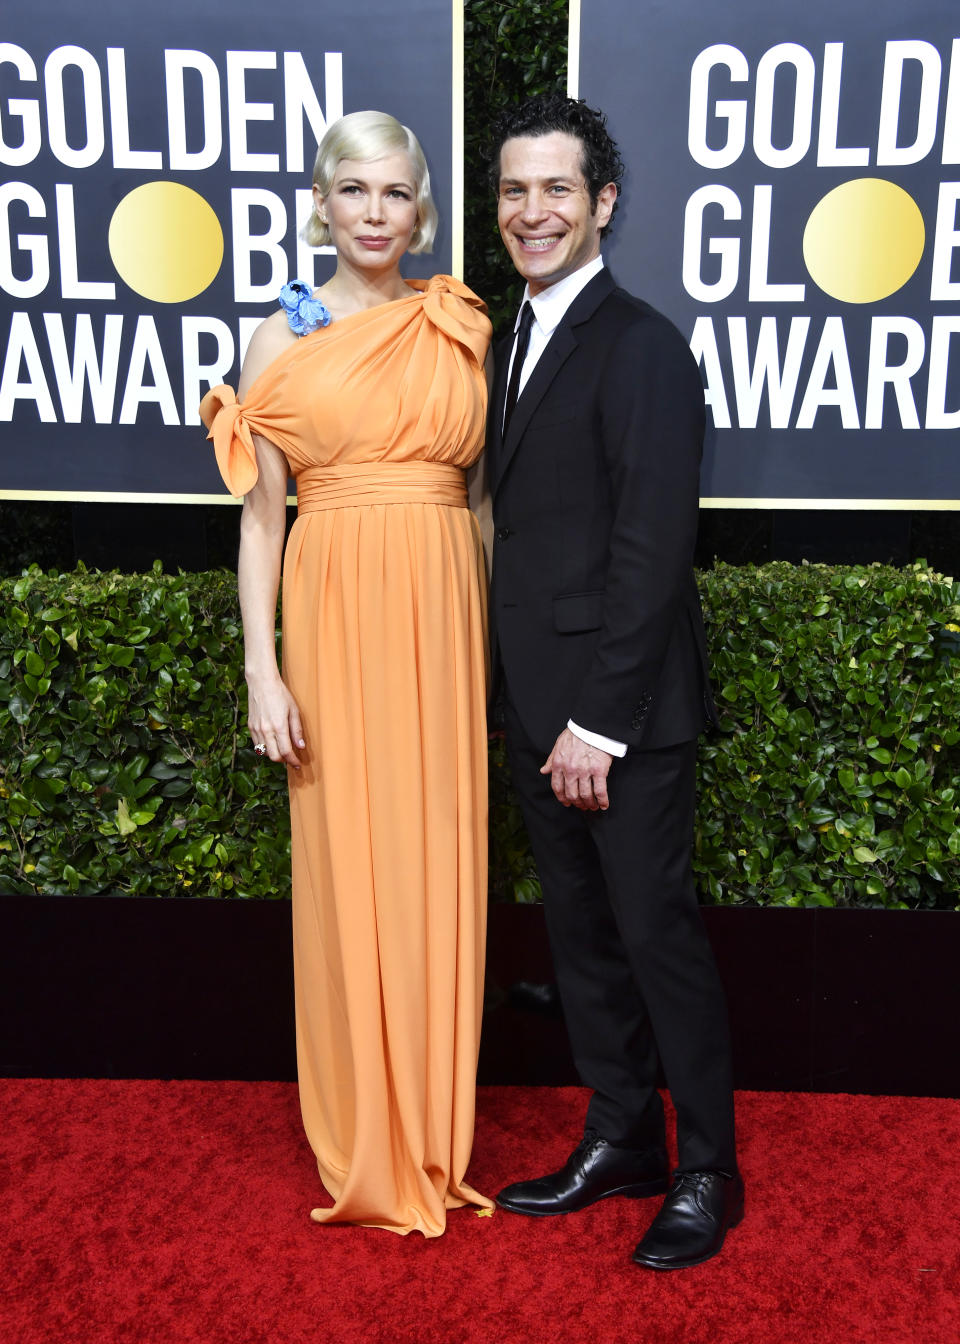 (L-R) Michelle Williams and Thomas Kail at the 2020 Golden Globe Awards on Jan. 5 in Los Angeles.